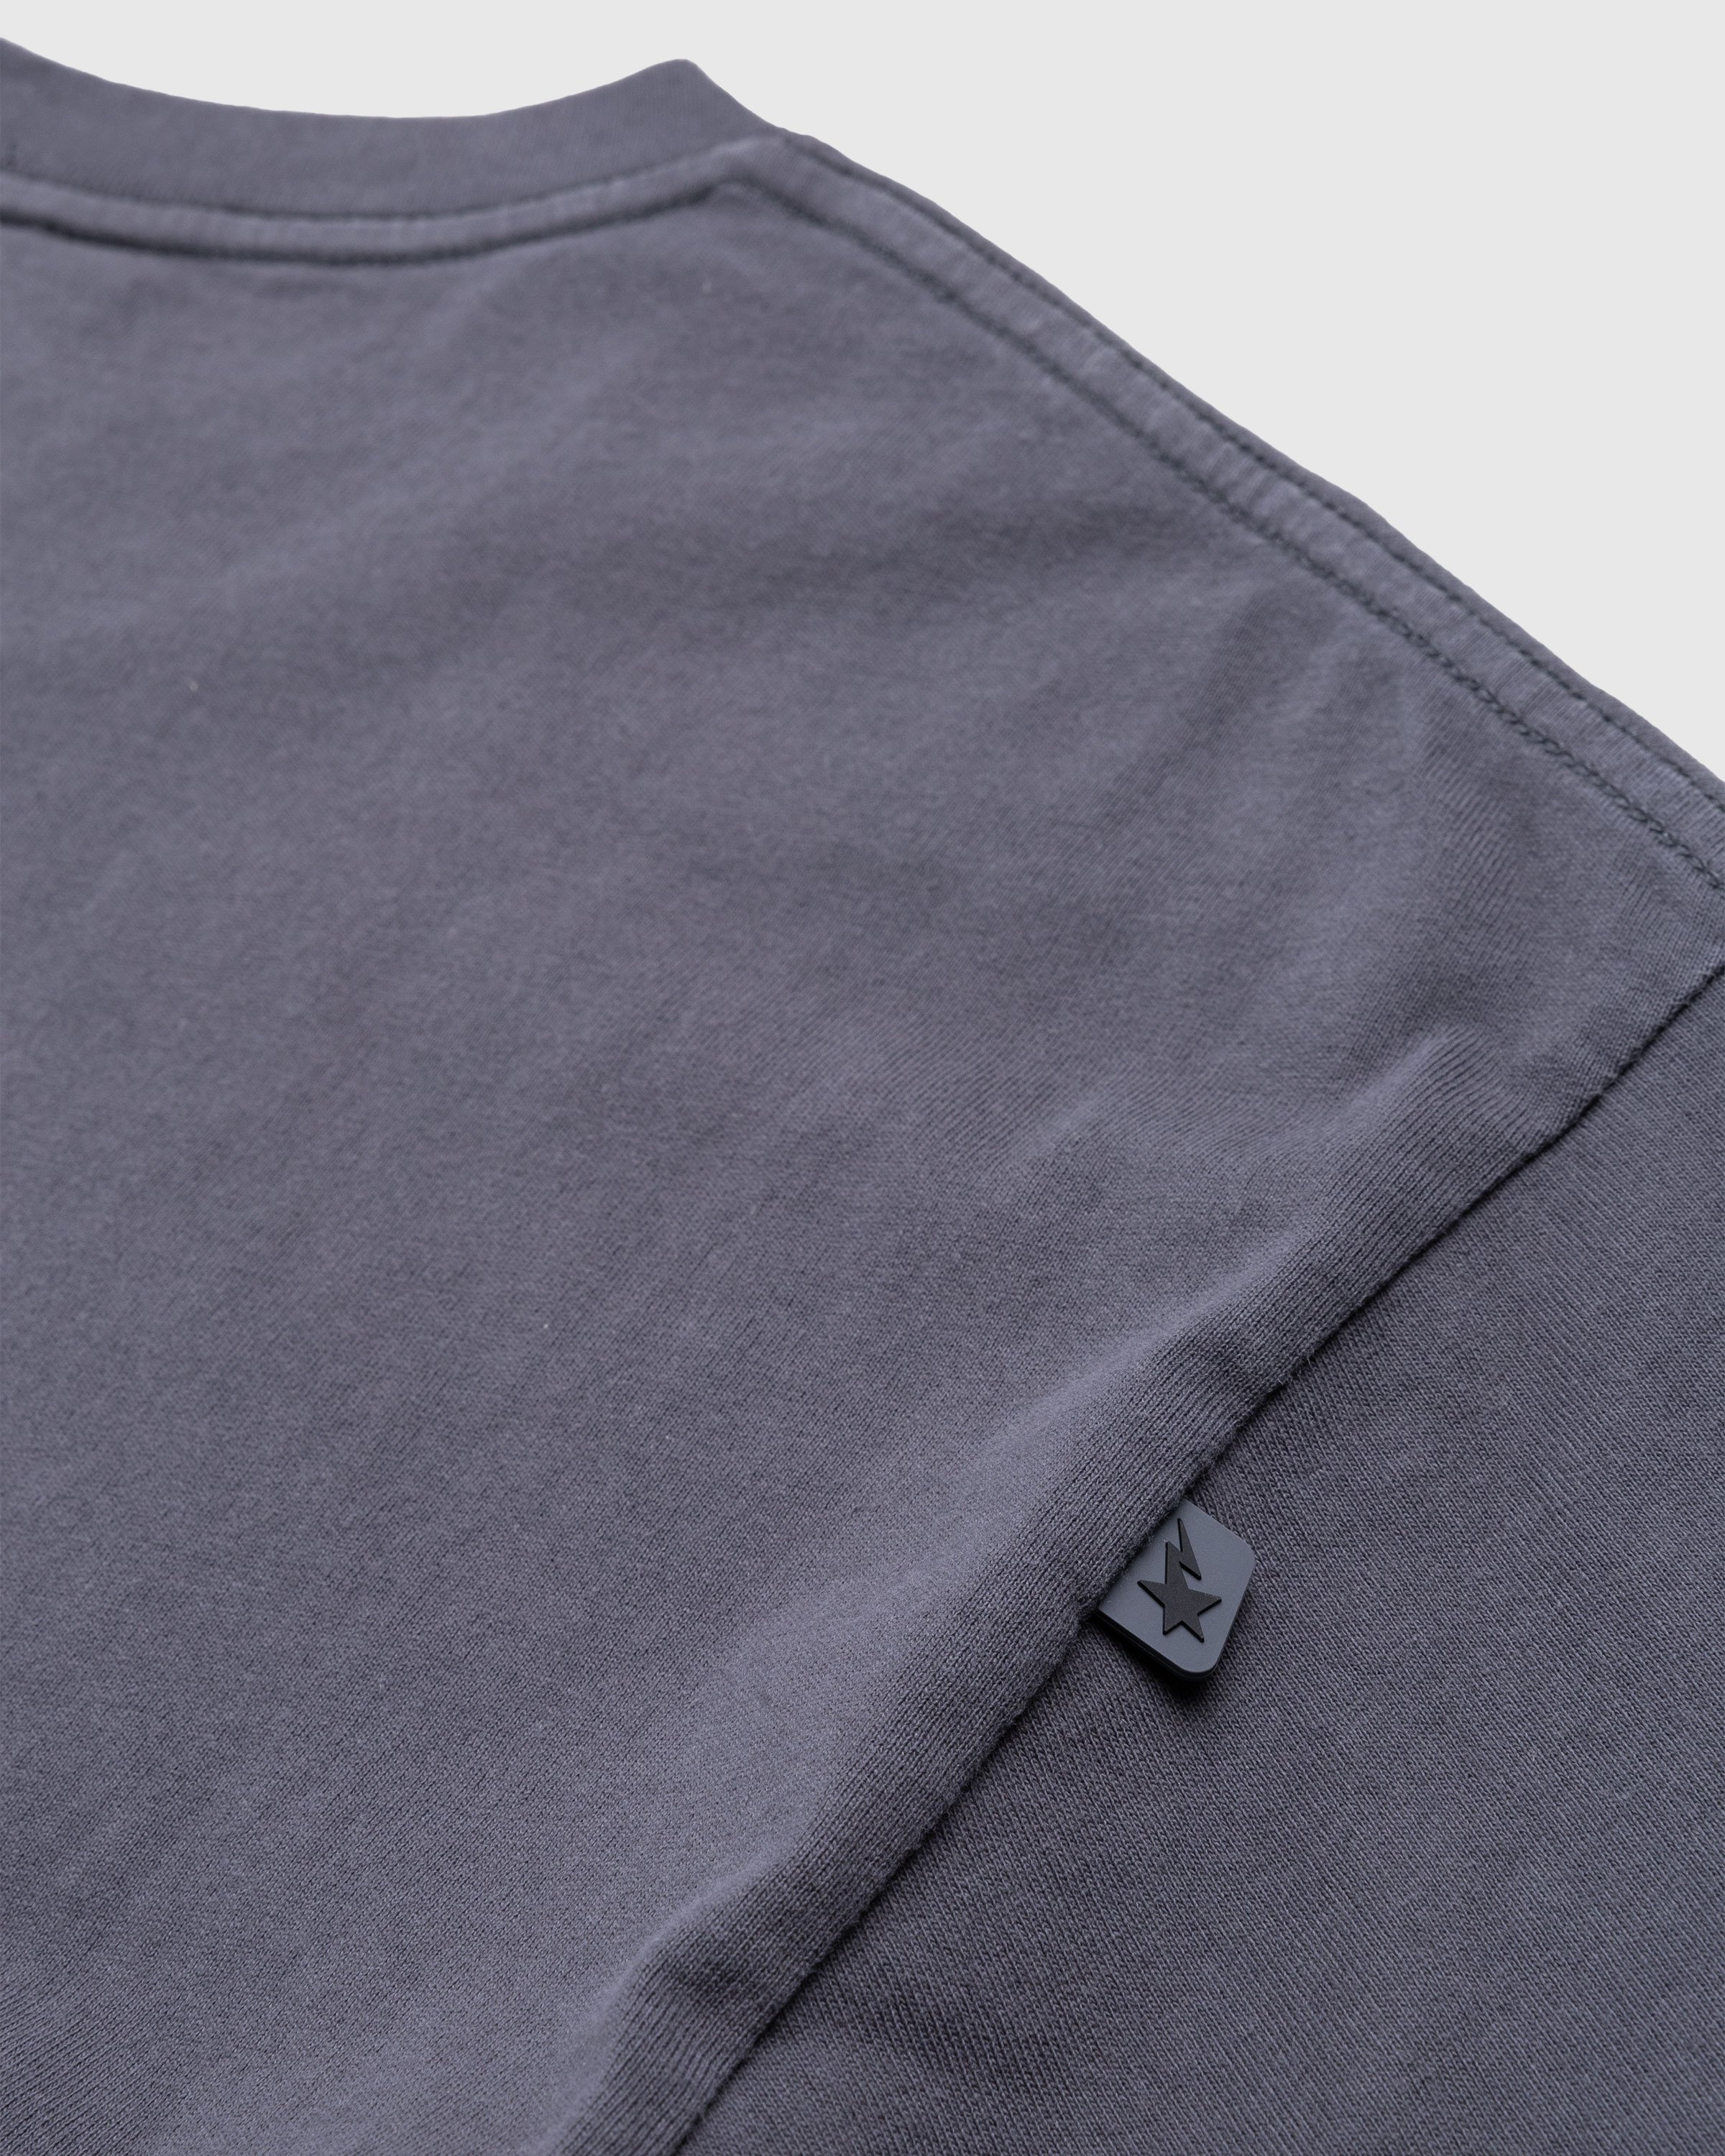 BAPE x Highsnobiety – Heavy Washed T-Shirt Charcoal - Tops - Grey - Image 5